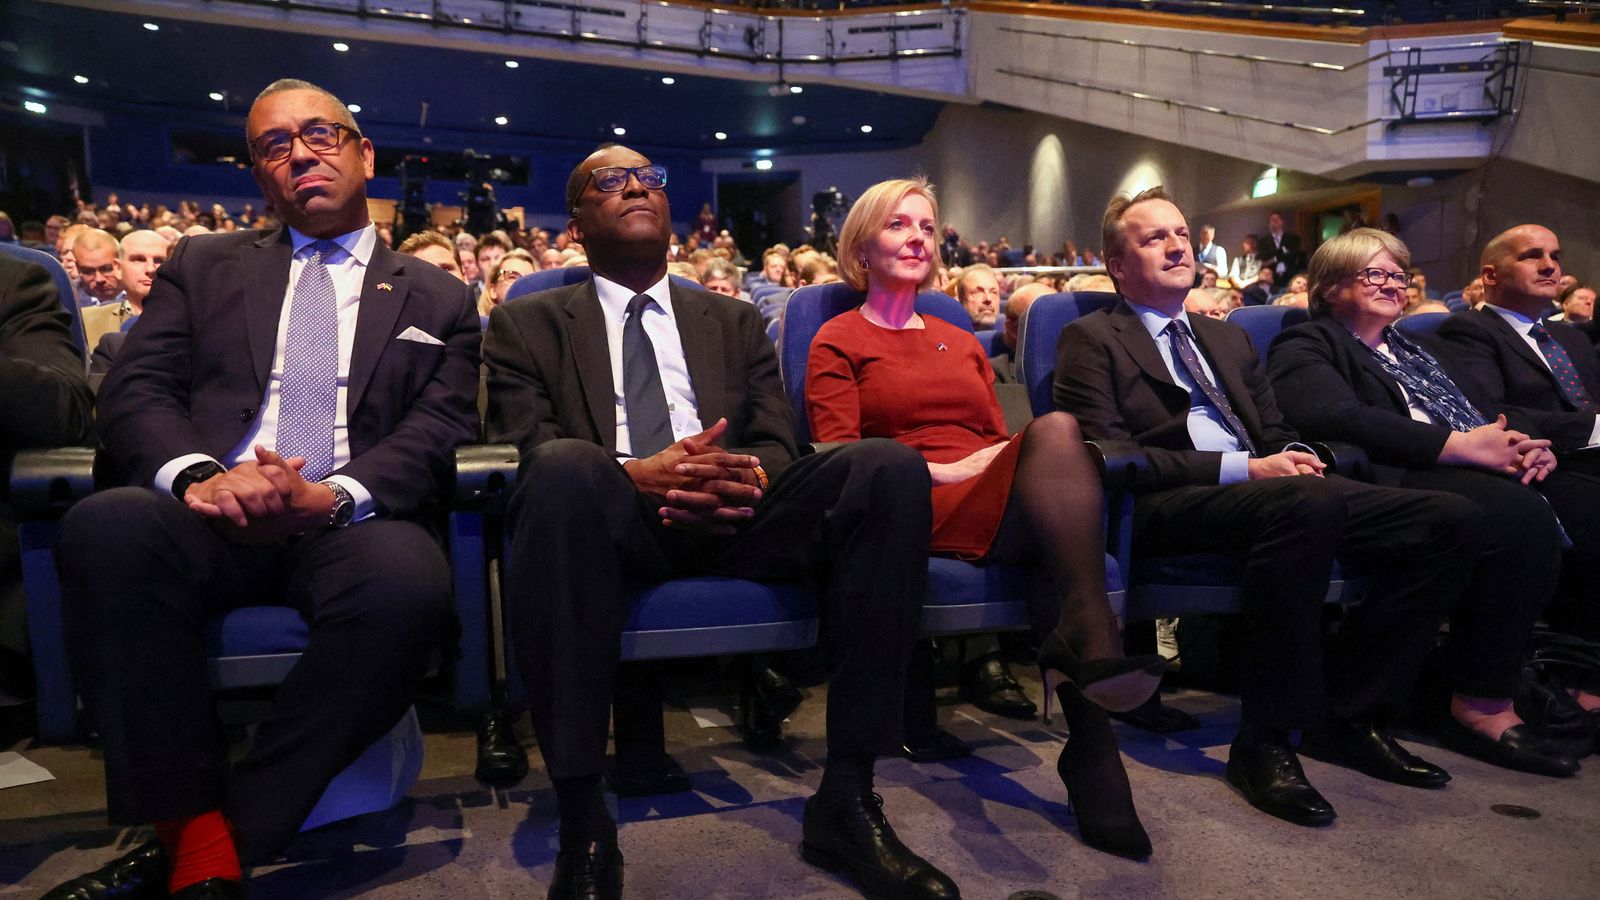 Tory conference is shrouded in gloom - has Liz Truss already sealed her own fate?